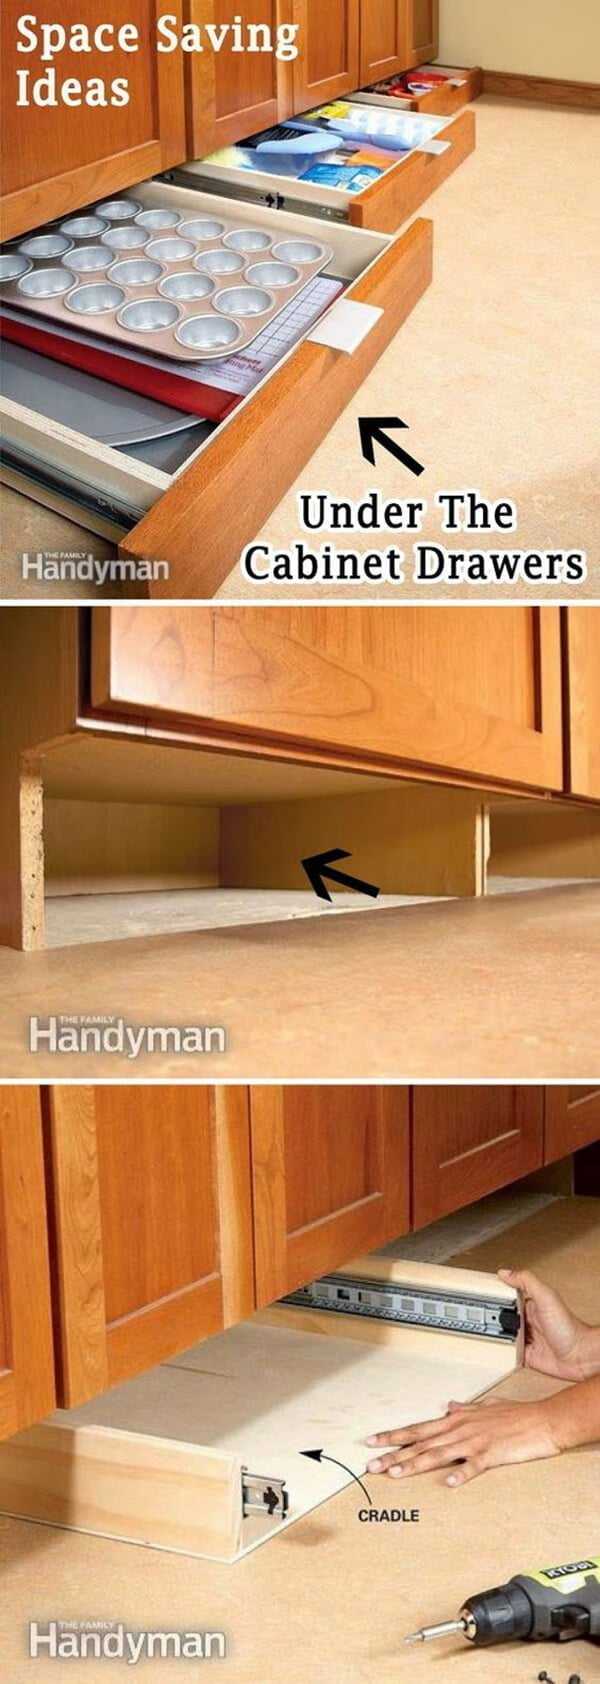 Maximize the Space Beneath Kitchen Cabinets